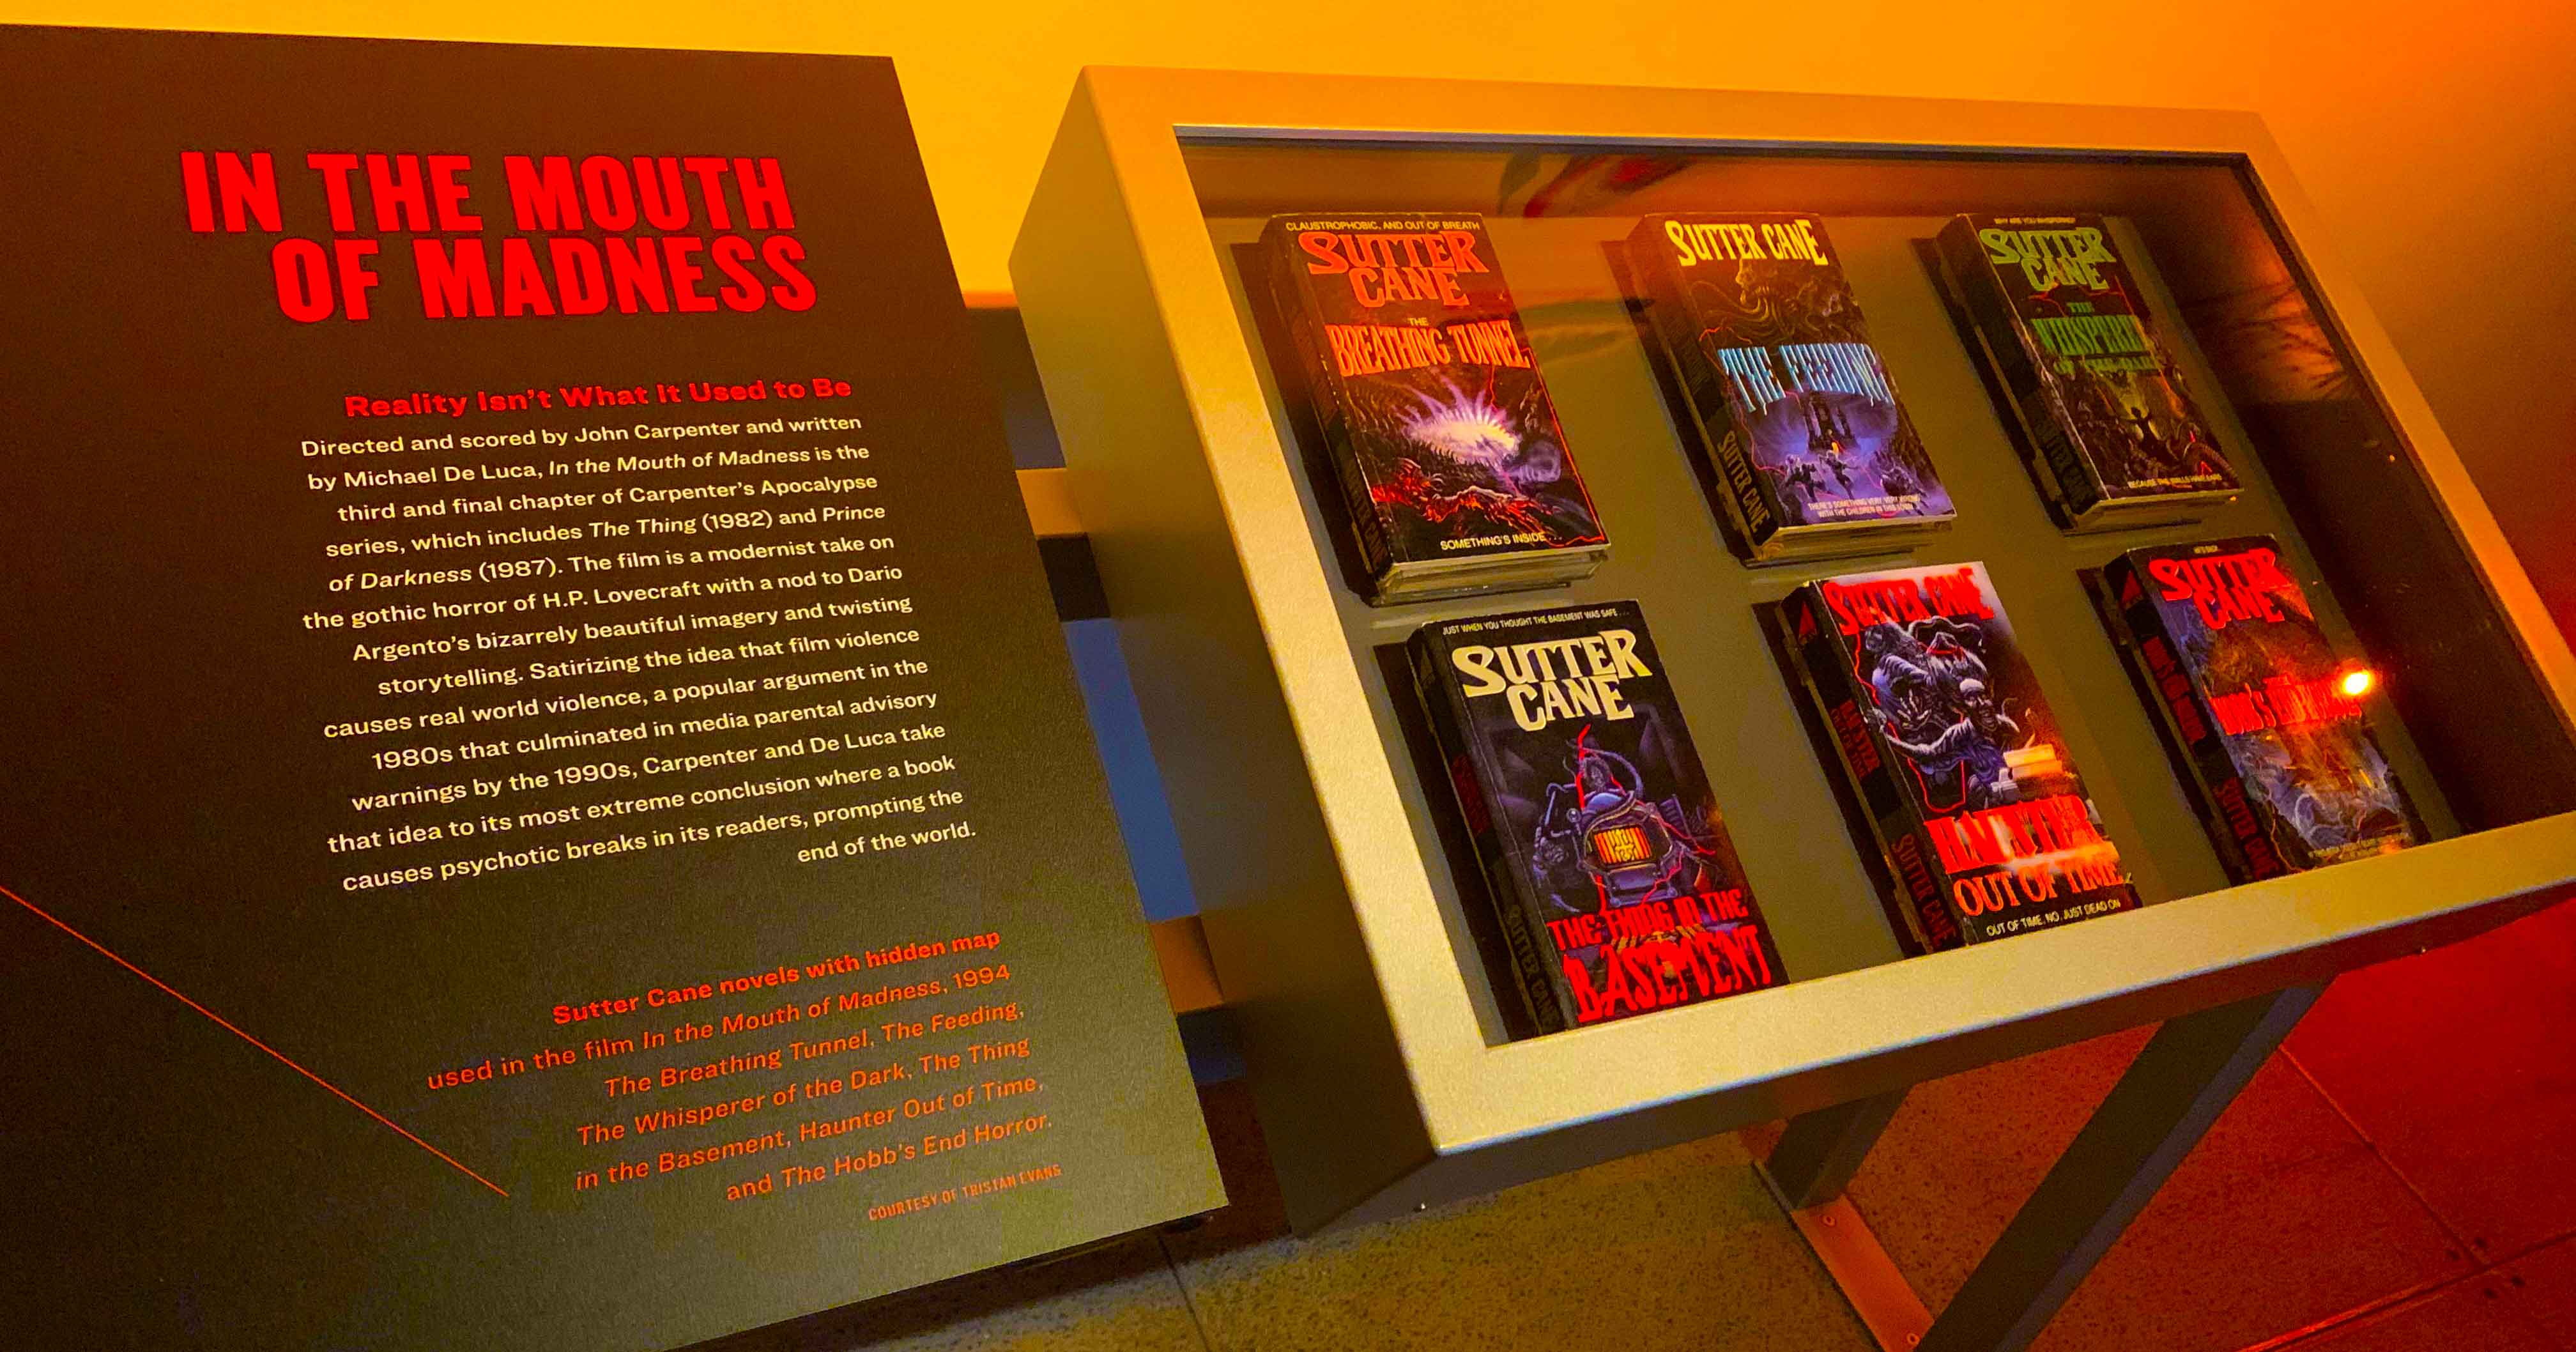 Sutter Novels From 'In the Mouth of Madness' (1994) on Display in 'Scared to Death: The Thrill of Horror Film' at MoPOP | Museum of Pop Culture